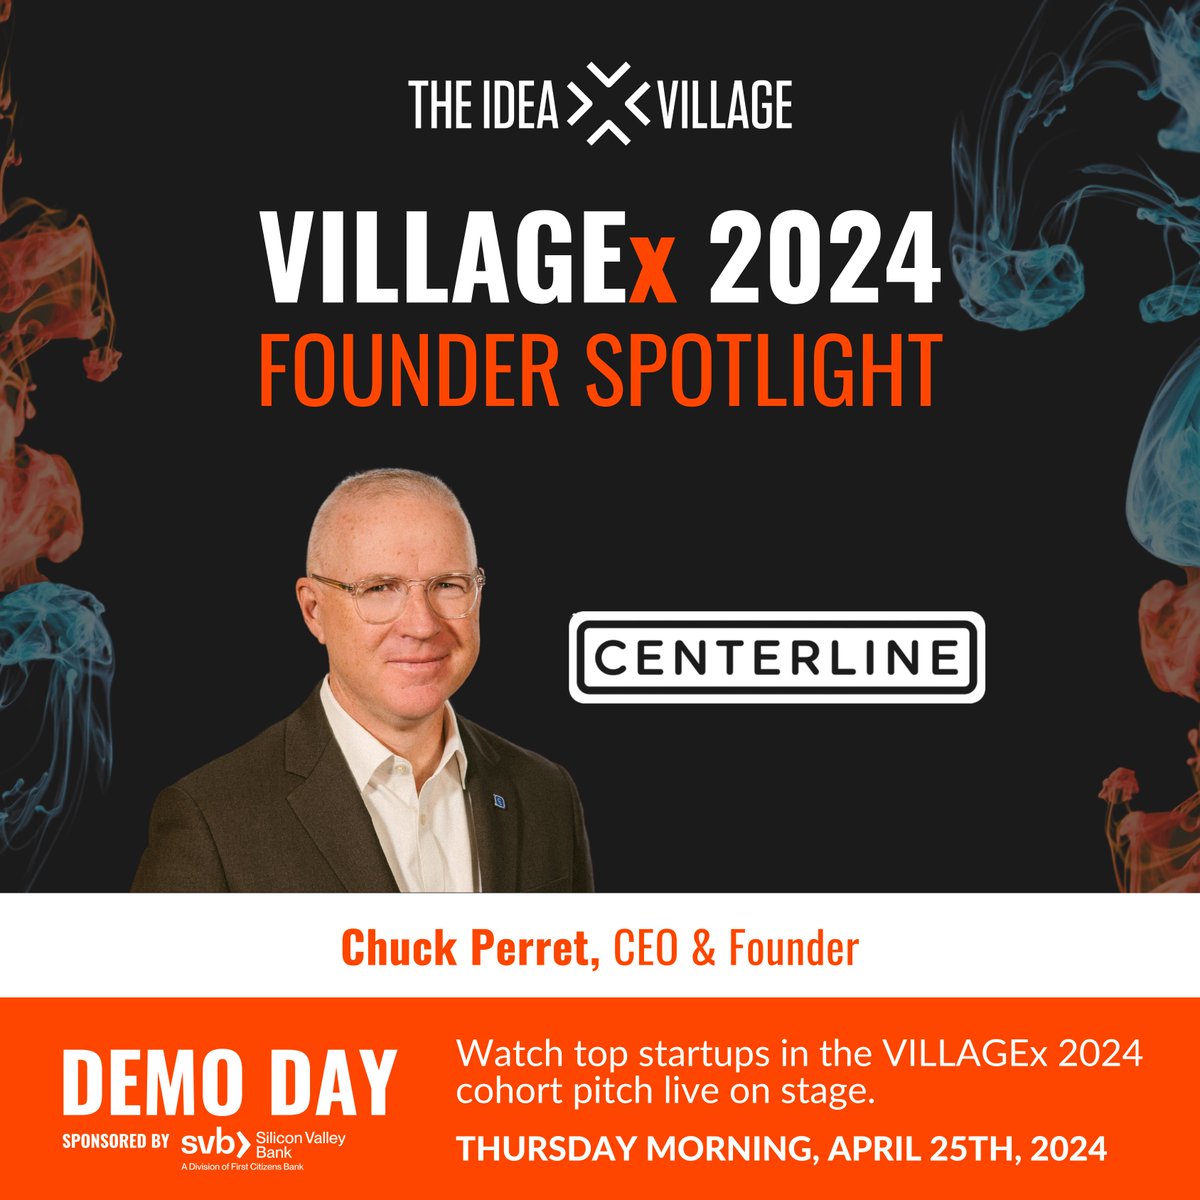 🚀 Meet Chuck Perret, founder and CEO of CENTERLINE. CENTERLINE is a cloud-based information management platform purpose-built for architects, owners, and construction professionals. 👷🏽 Connect with Chuck and other VILLAGEx 2024 founders at Demo Day! ideavillage.org/demoday2024